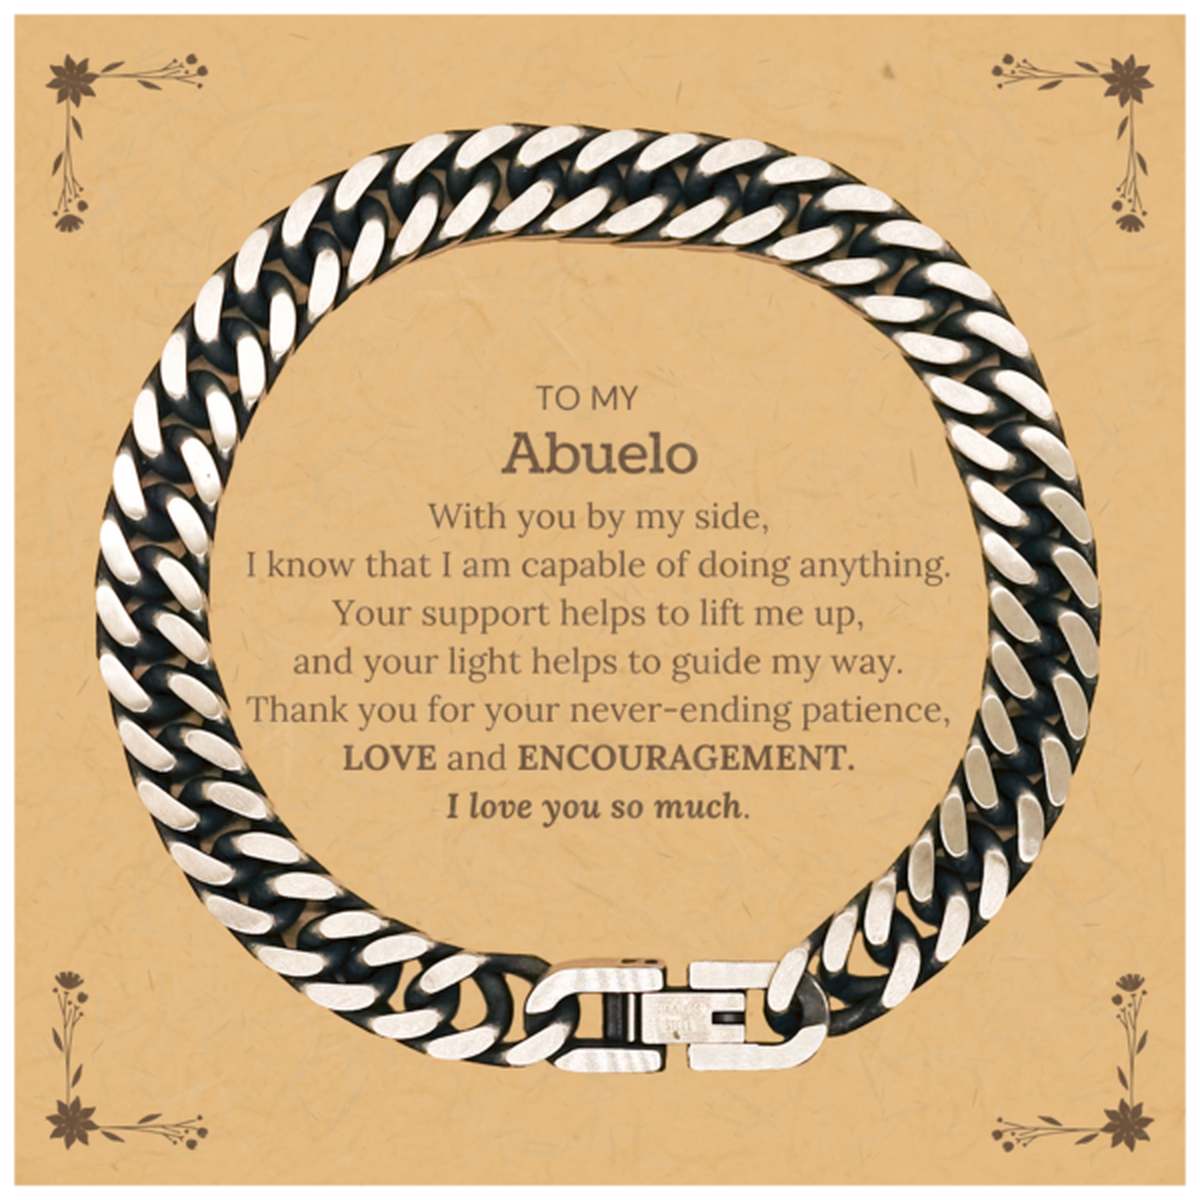 Appreciation Abuelo Cuban Link Chain Bracelet Gifts, To My Abuelo Birthday Christmas Wedding Keepsake Gifts for Abuelo With you by my side, I know that I am capable of doing anything. I love you so much